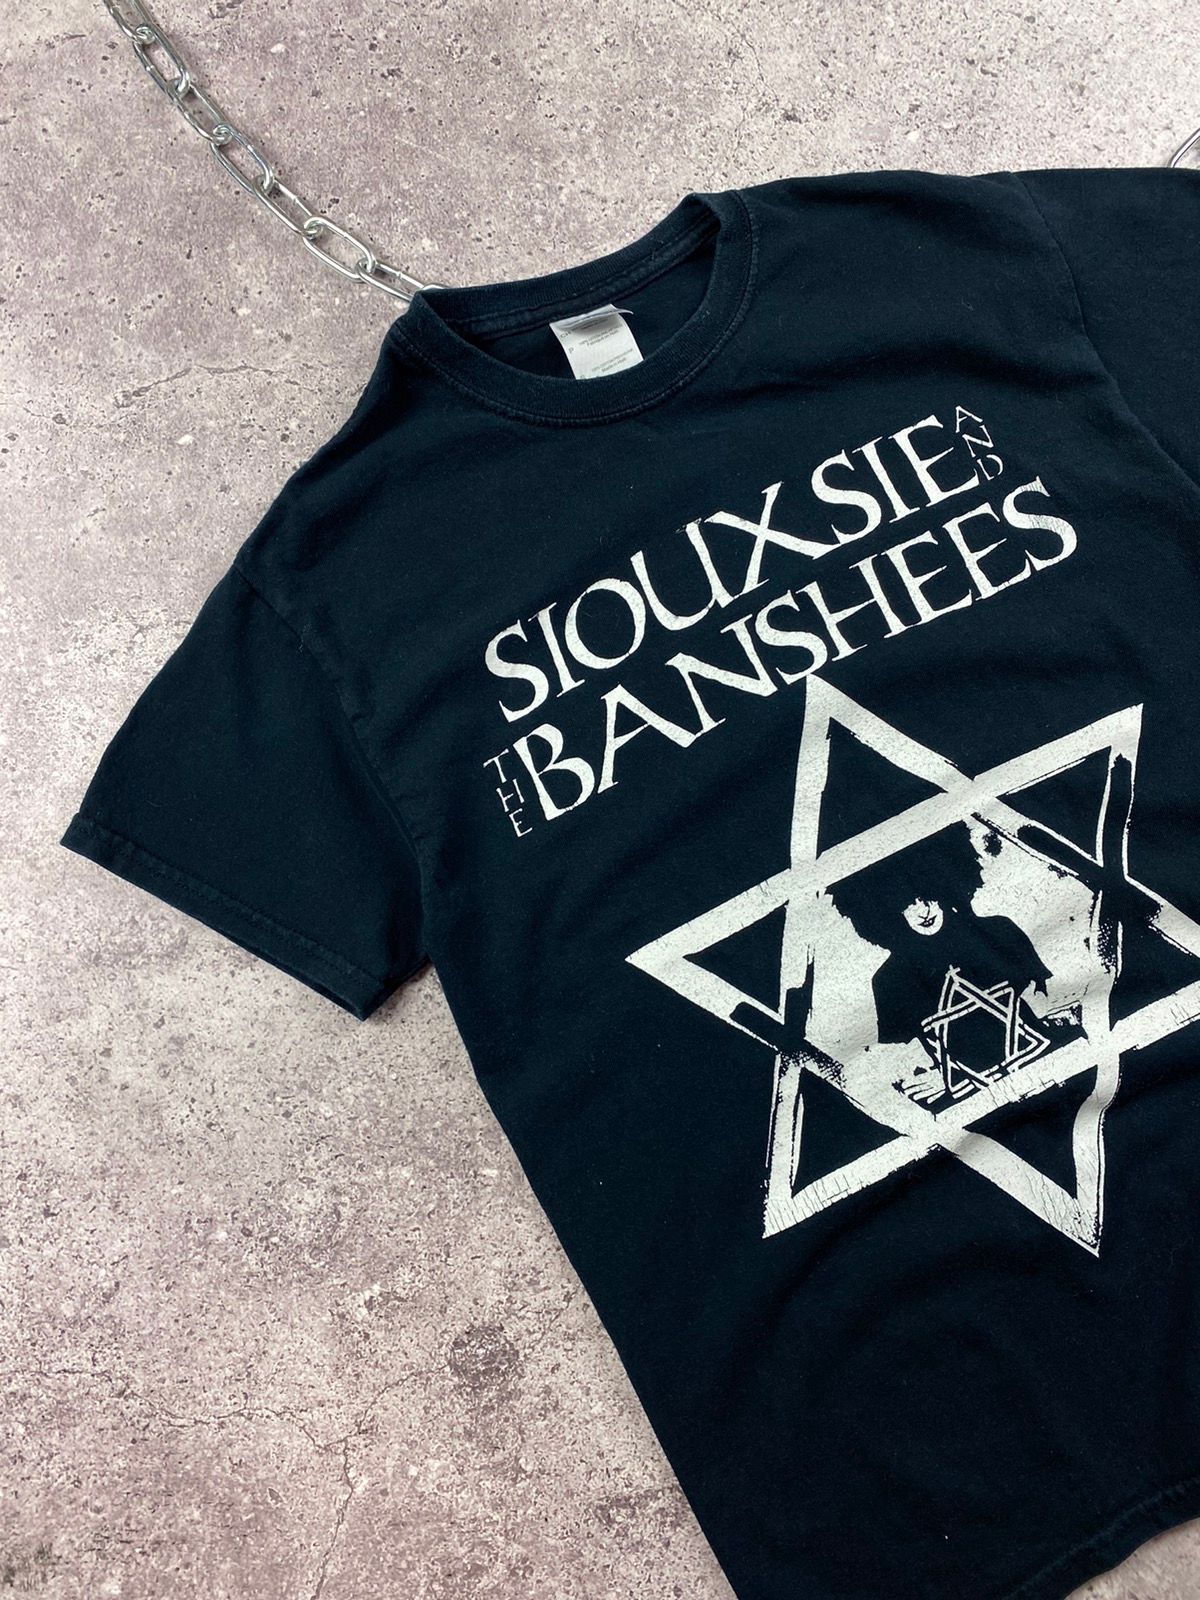 Vintage Vintage Siouxsie And The Banshees Tee Shirt Punk Faded Size US S / EU 44-46 / 1 - 3 Thumbnail